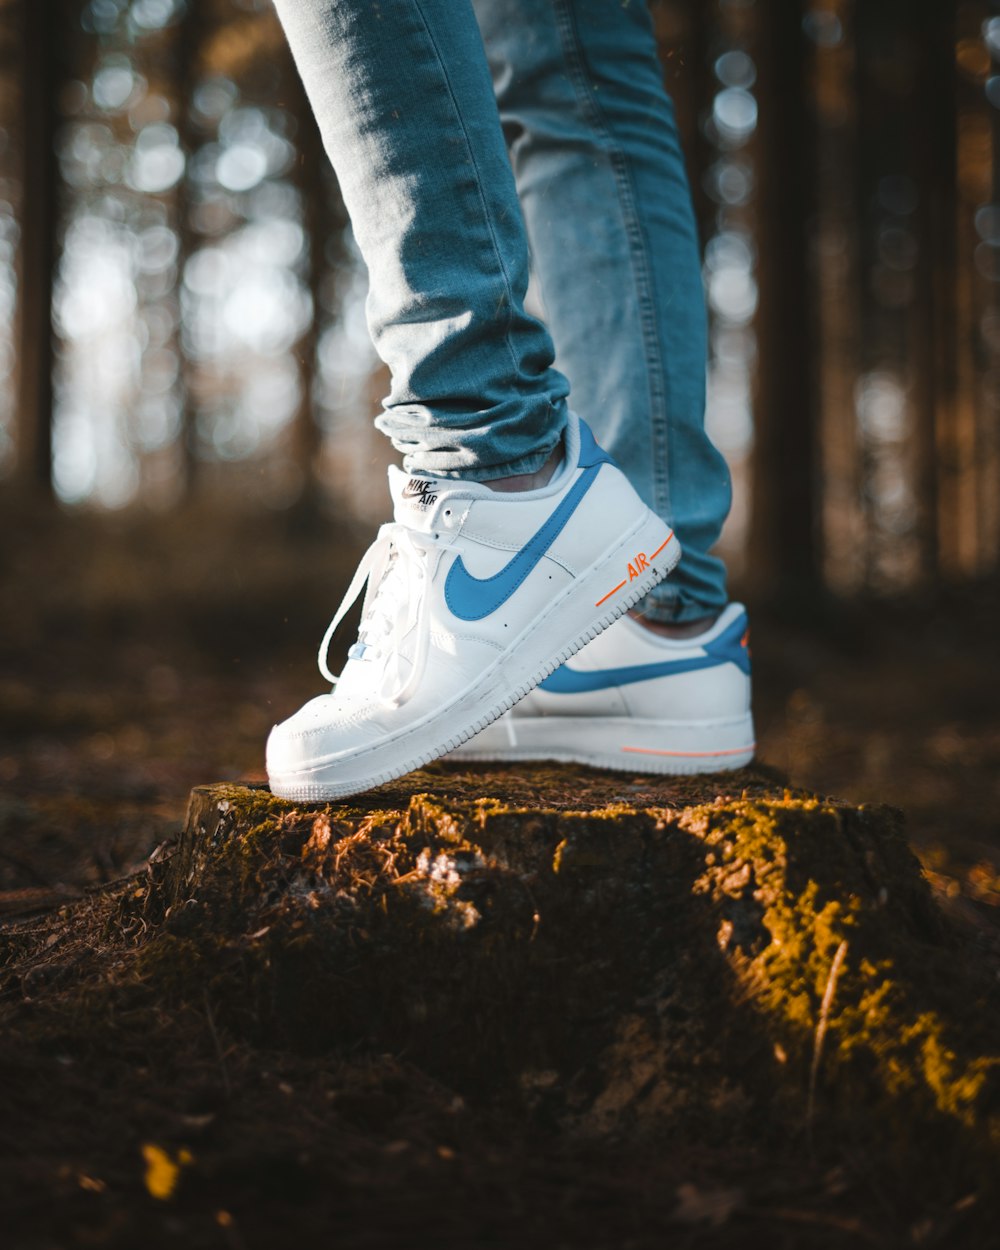 Person wearing blue denim jeans and white nike air max shoes standing on  tree stomp photo – Free Sunset Image on Unsplash